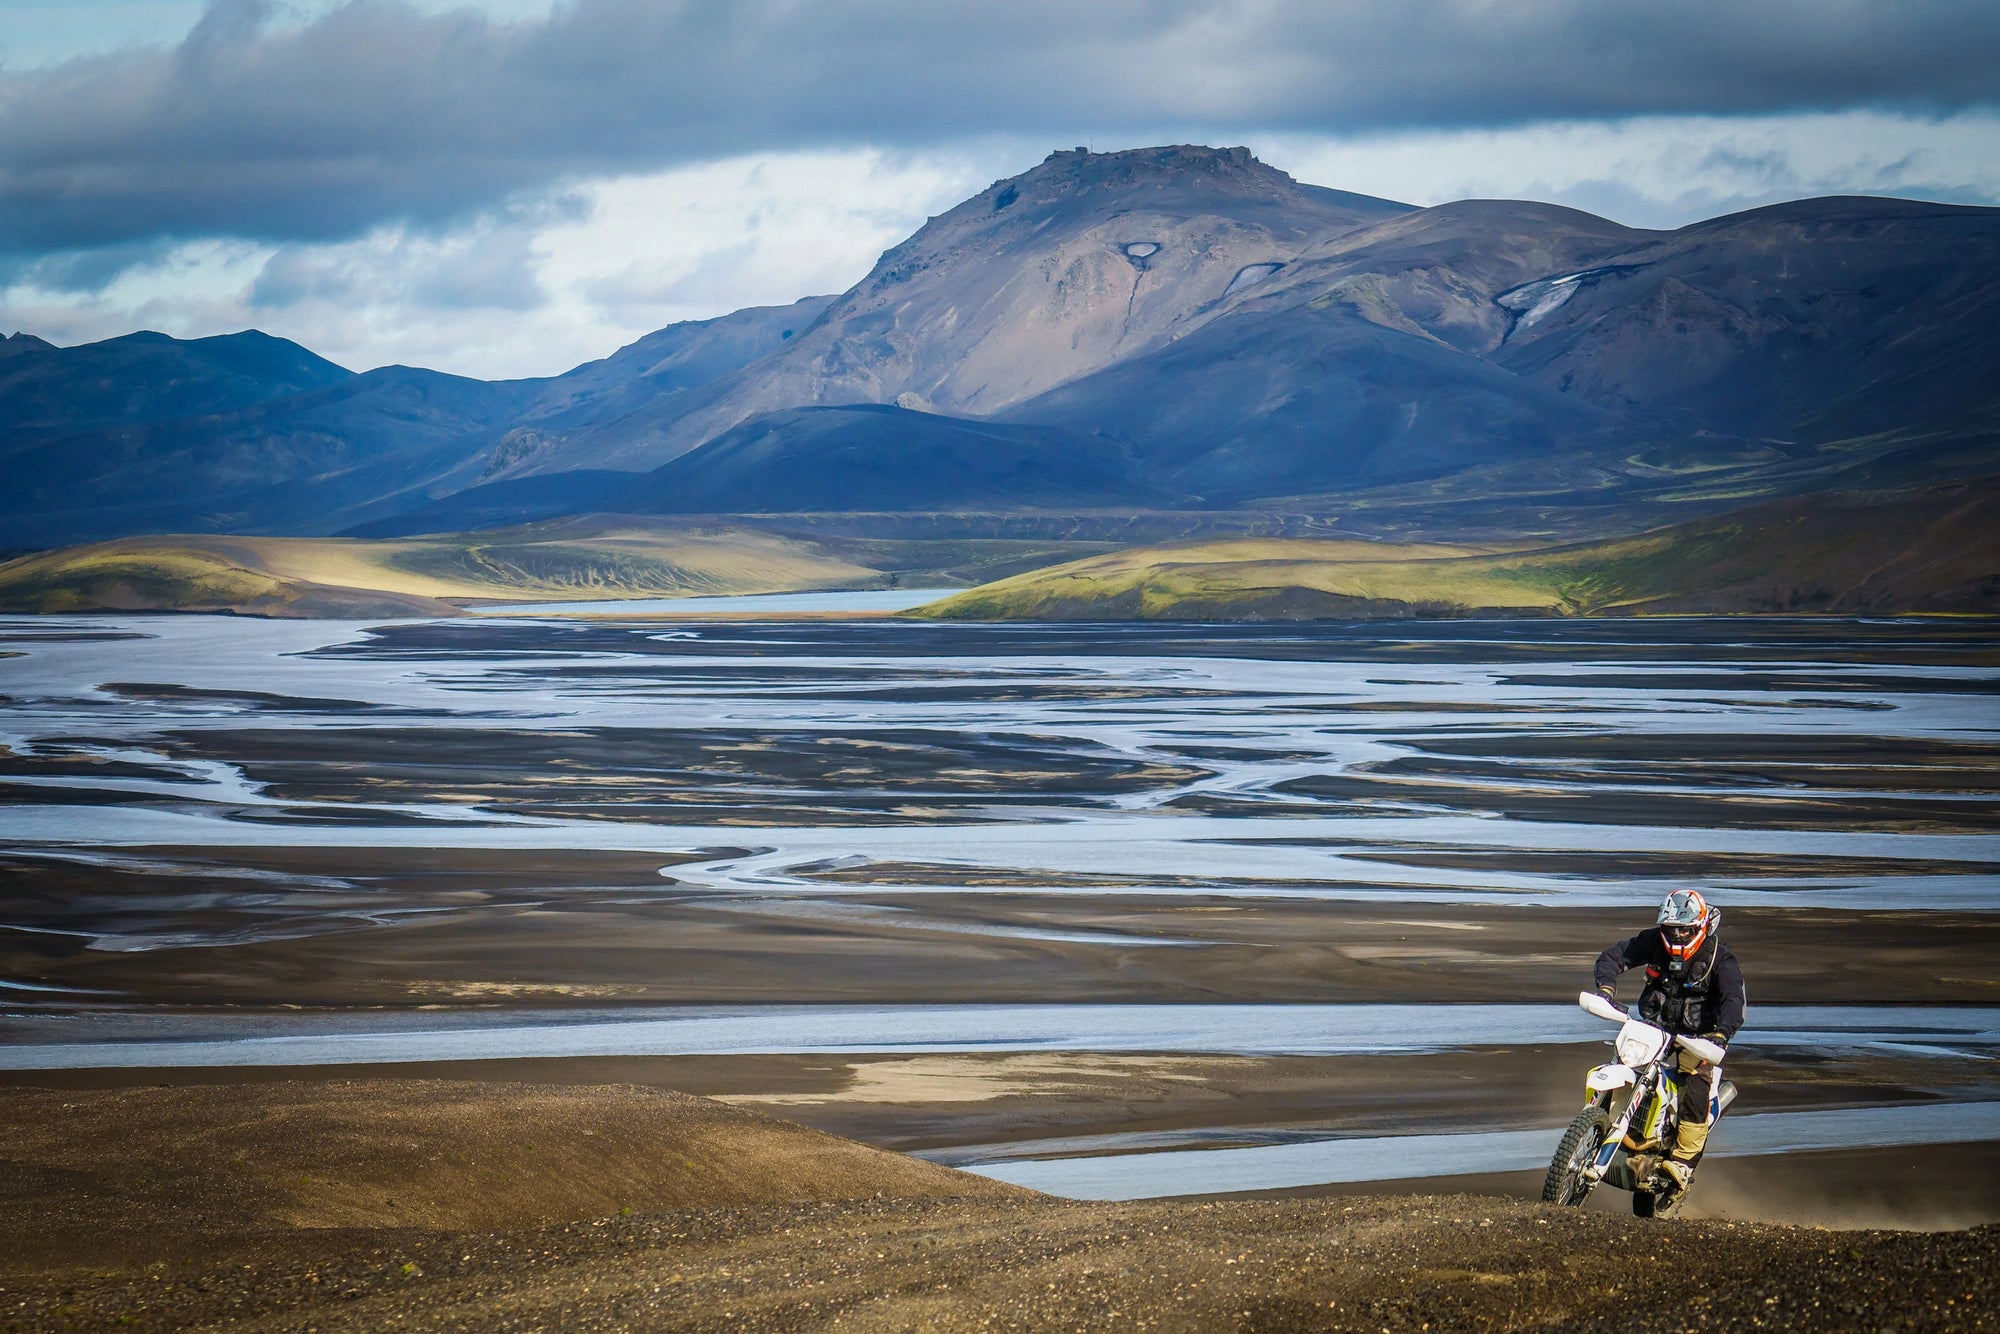 LOOK BACK: ISSUE 14, 66° NORTH - UPSHIFT ONLINE EXPLORES THE ICELANDIC WILDS